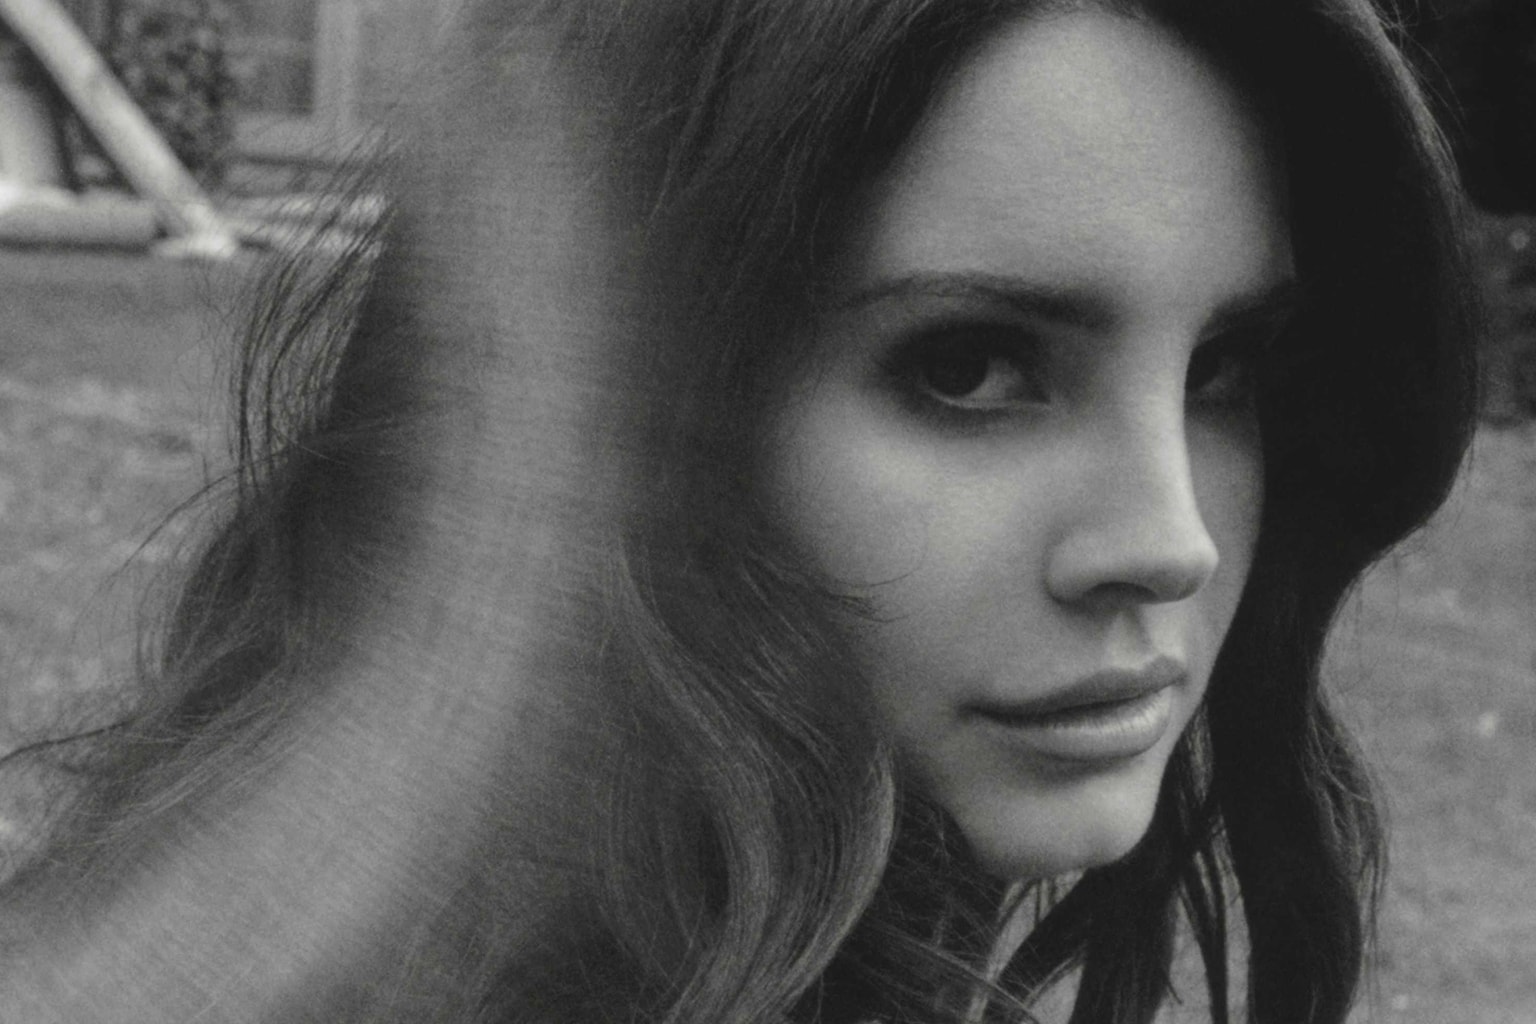 Lana Del Rey Attempted Kidnapping in Florida Michael Hunt Orlando